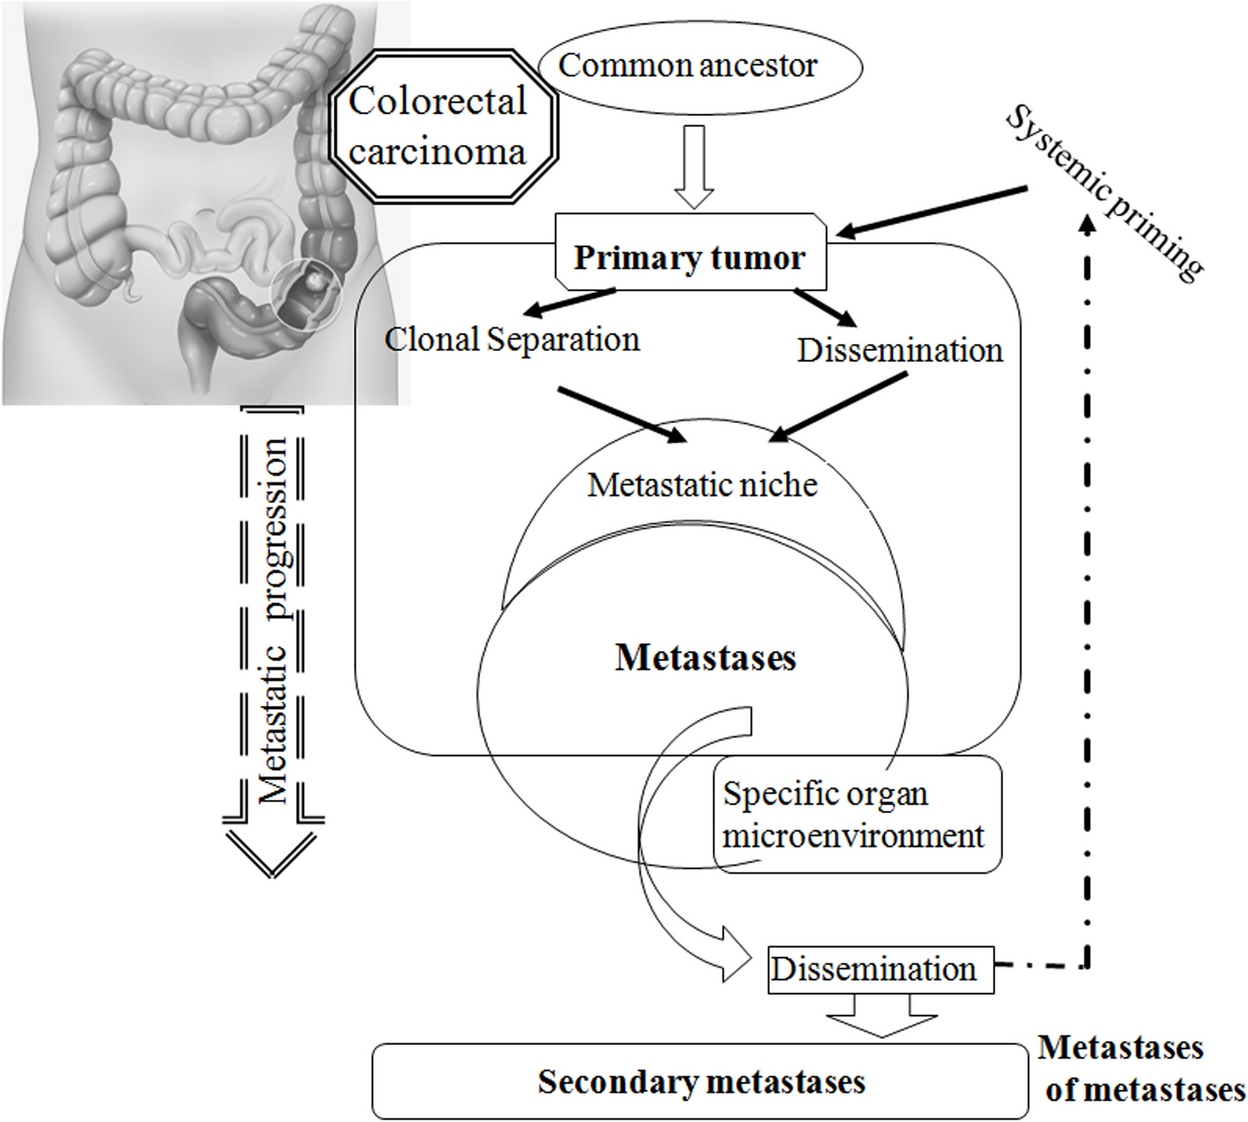 Molecular perspectives on systemic priming and concomitant immunity in colorectal carcinoma